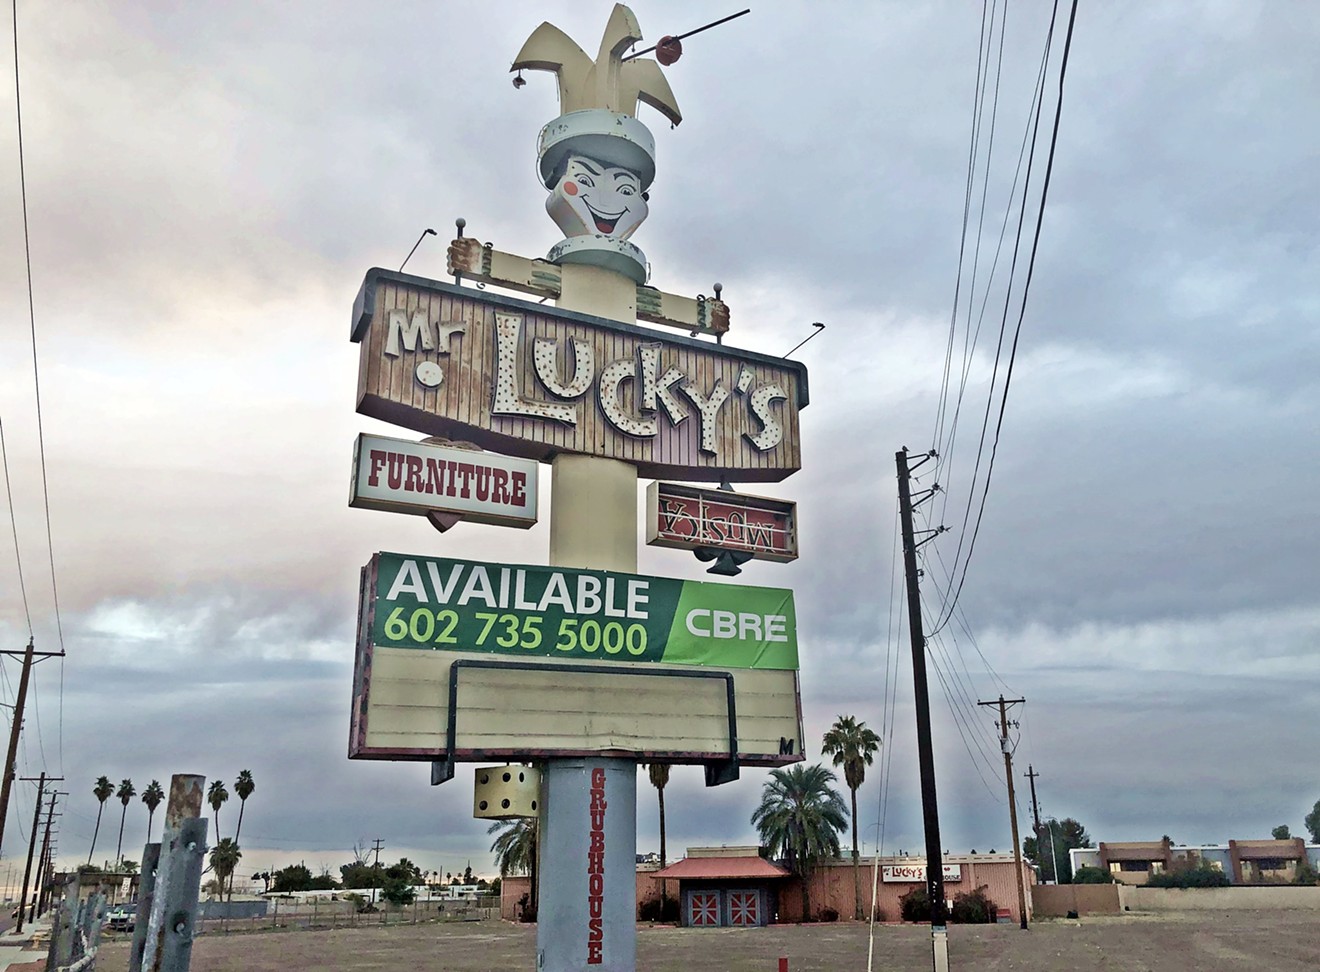 Mr. Lucky's iconic sign.